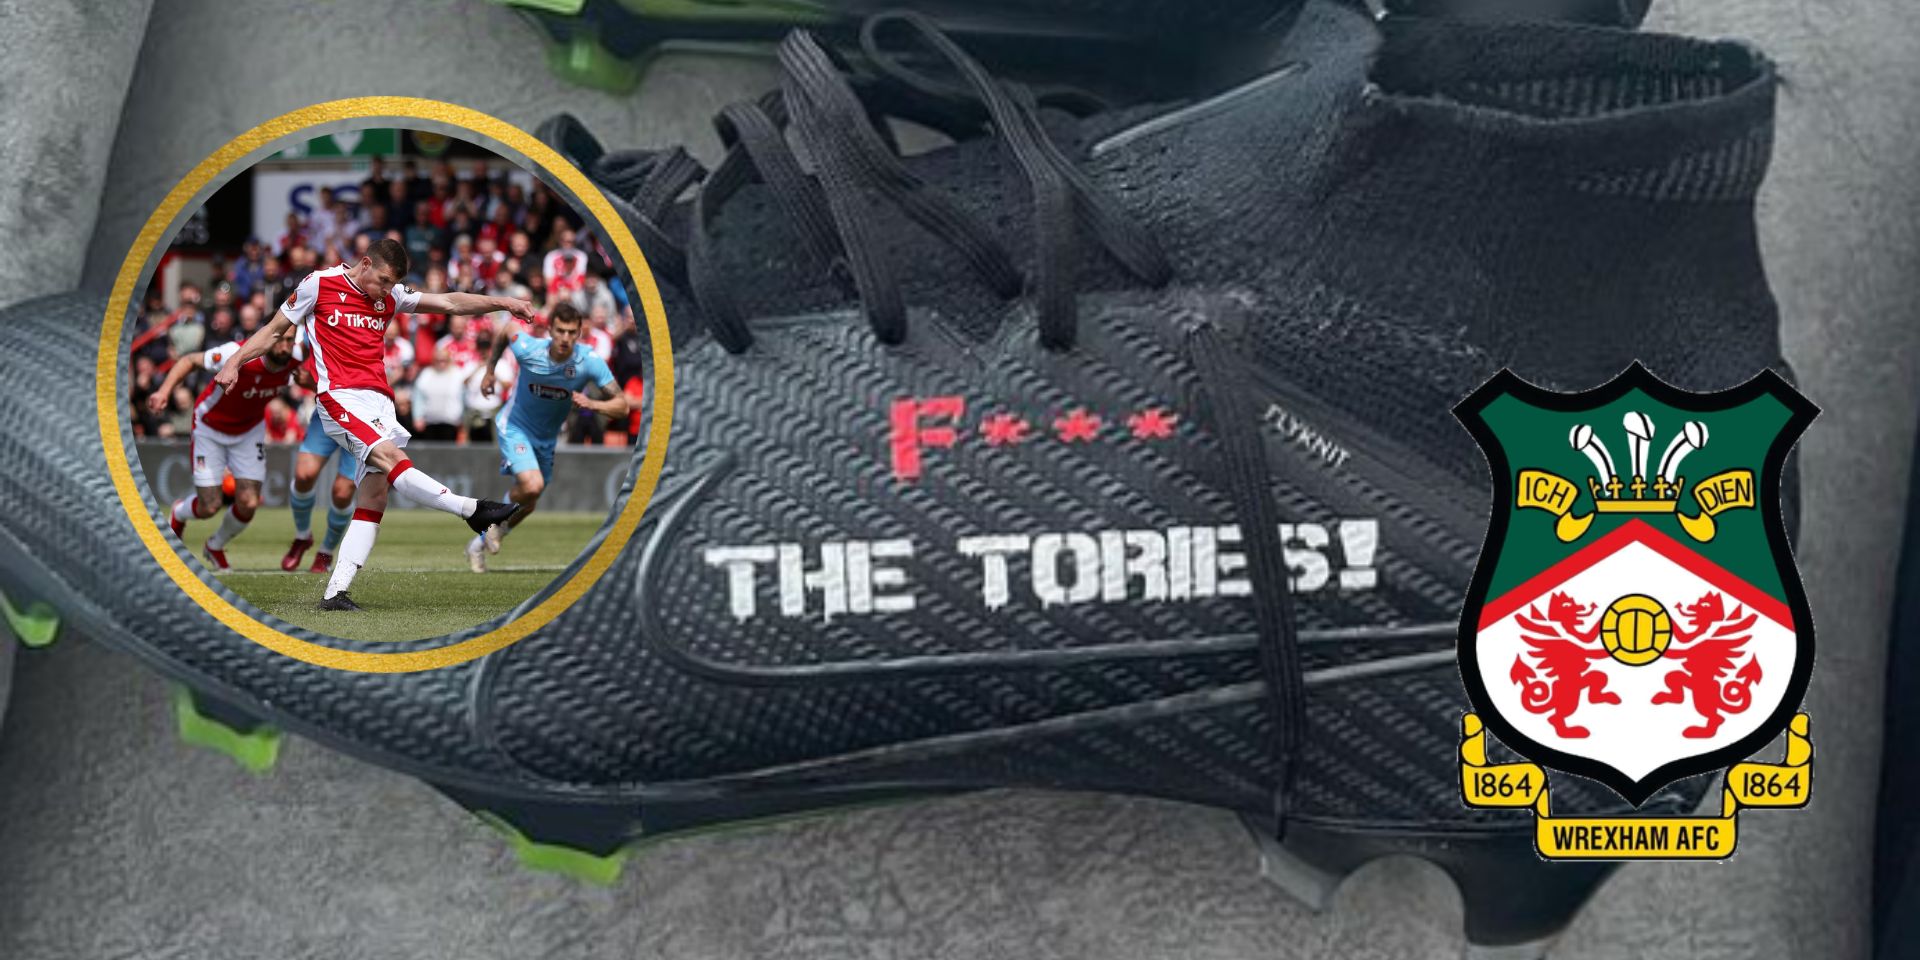 Wrexham to discipline ex-Liverpool youth player for x-rated boots mocking Tories